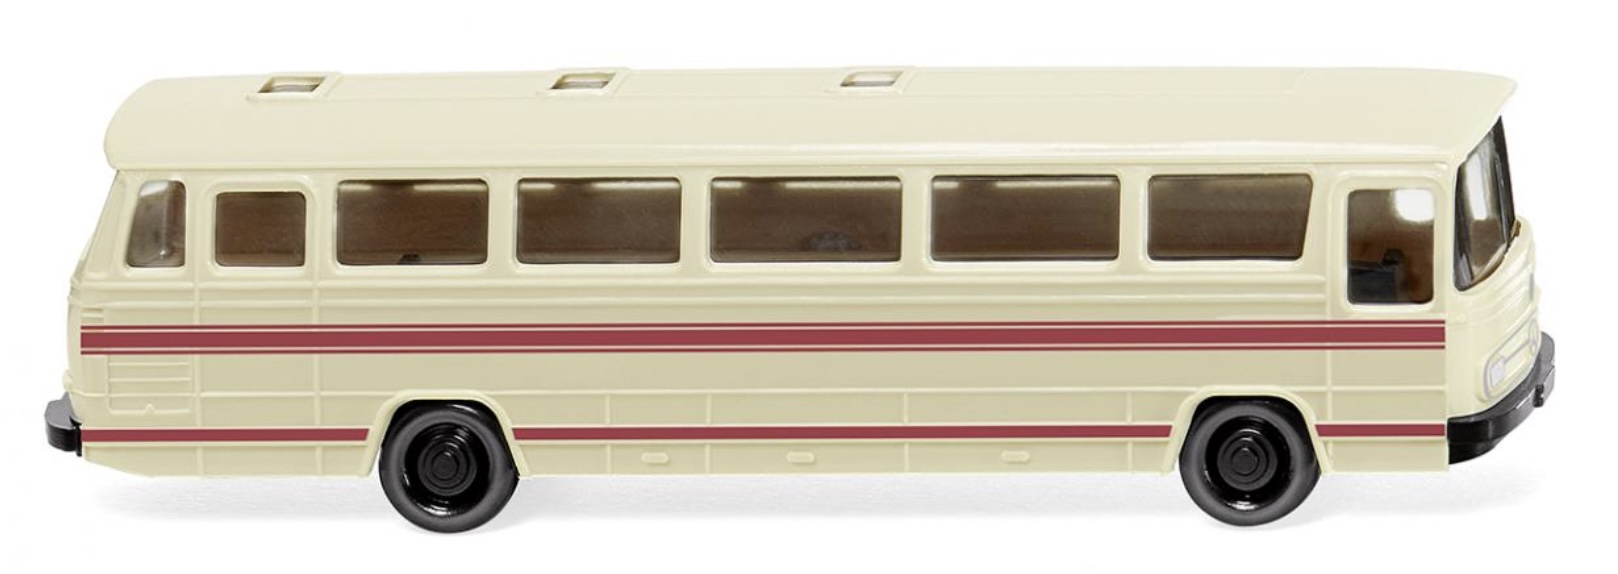 N Scale - Wiking - 097102 - Vehicle, Bus, Mercedes Benz - Painted/Lettered - Tour Bus